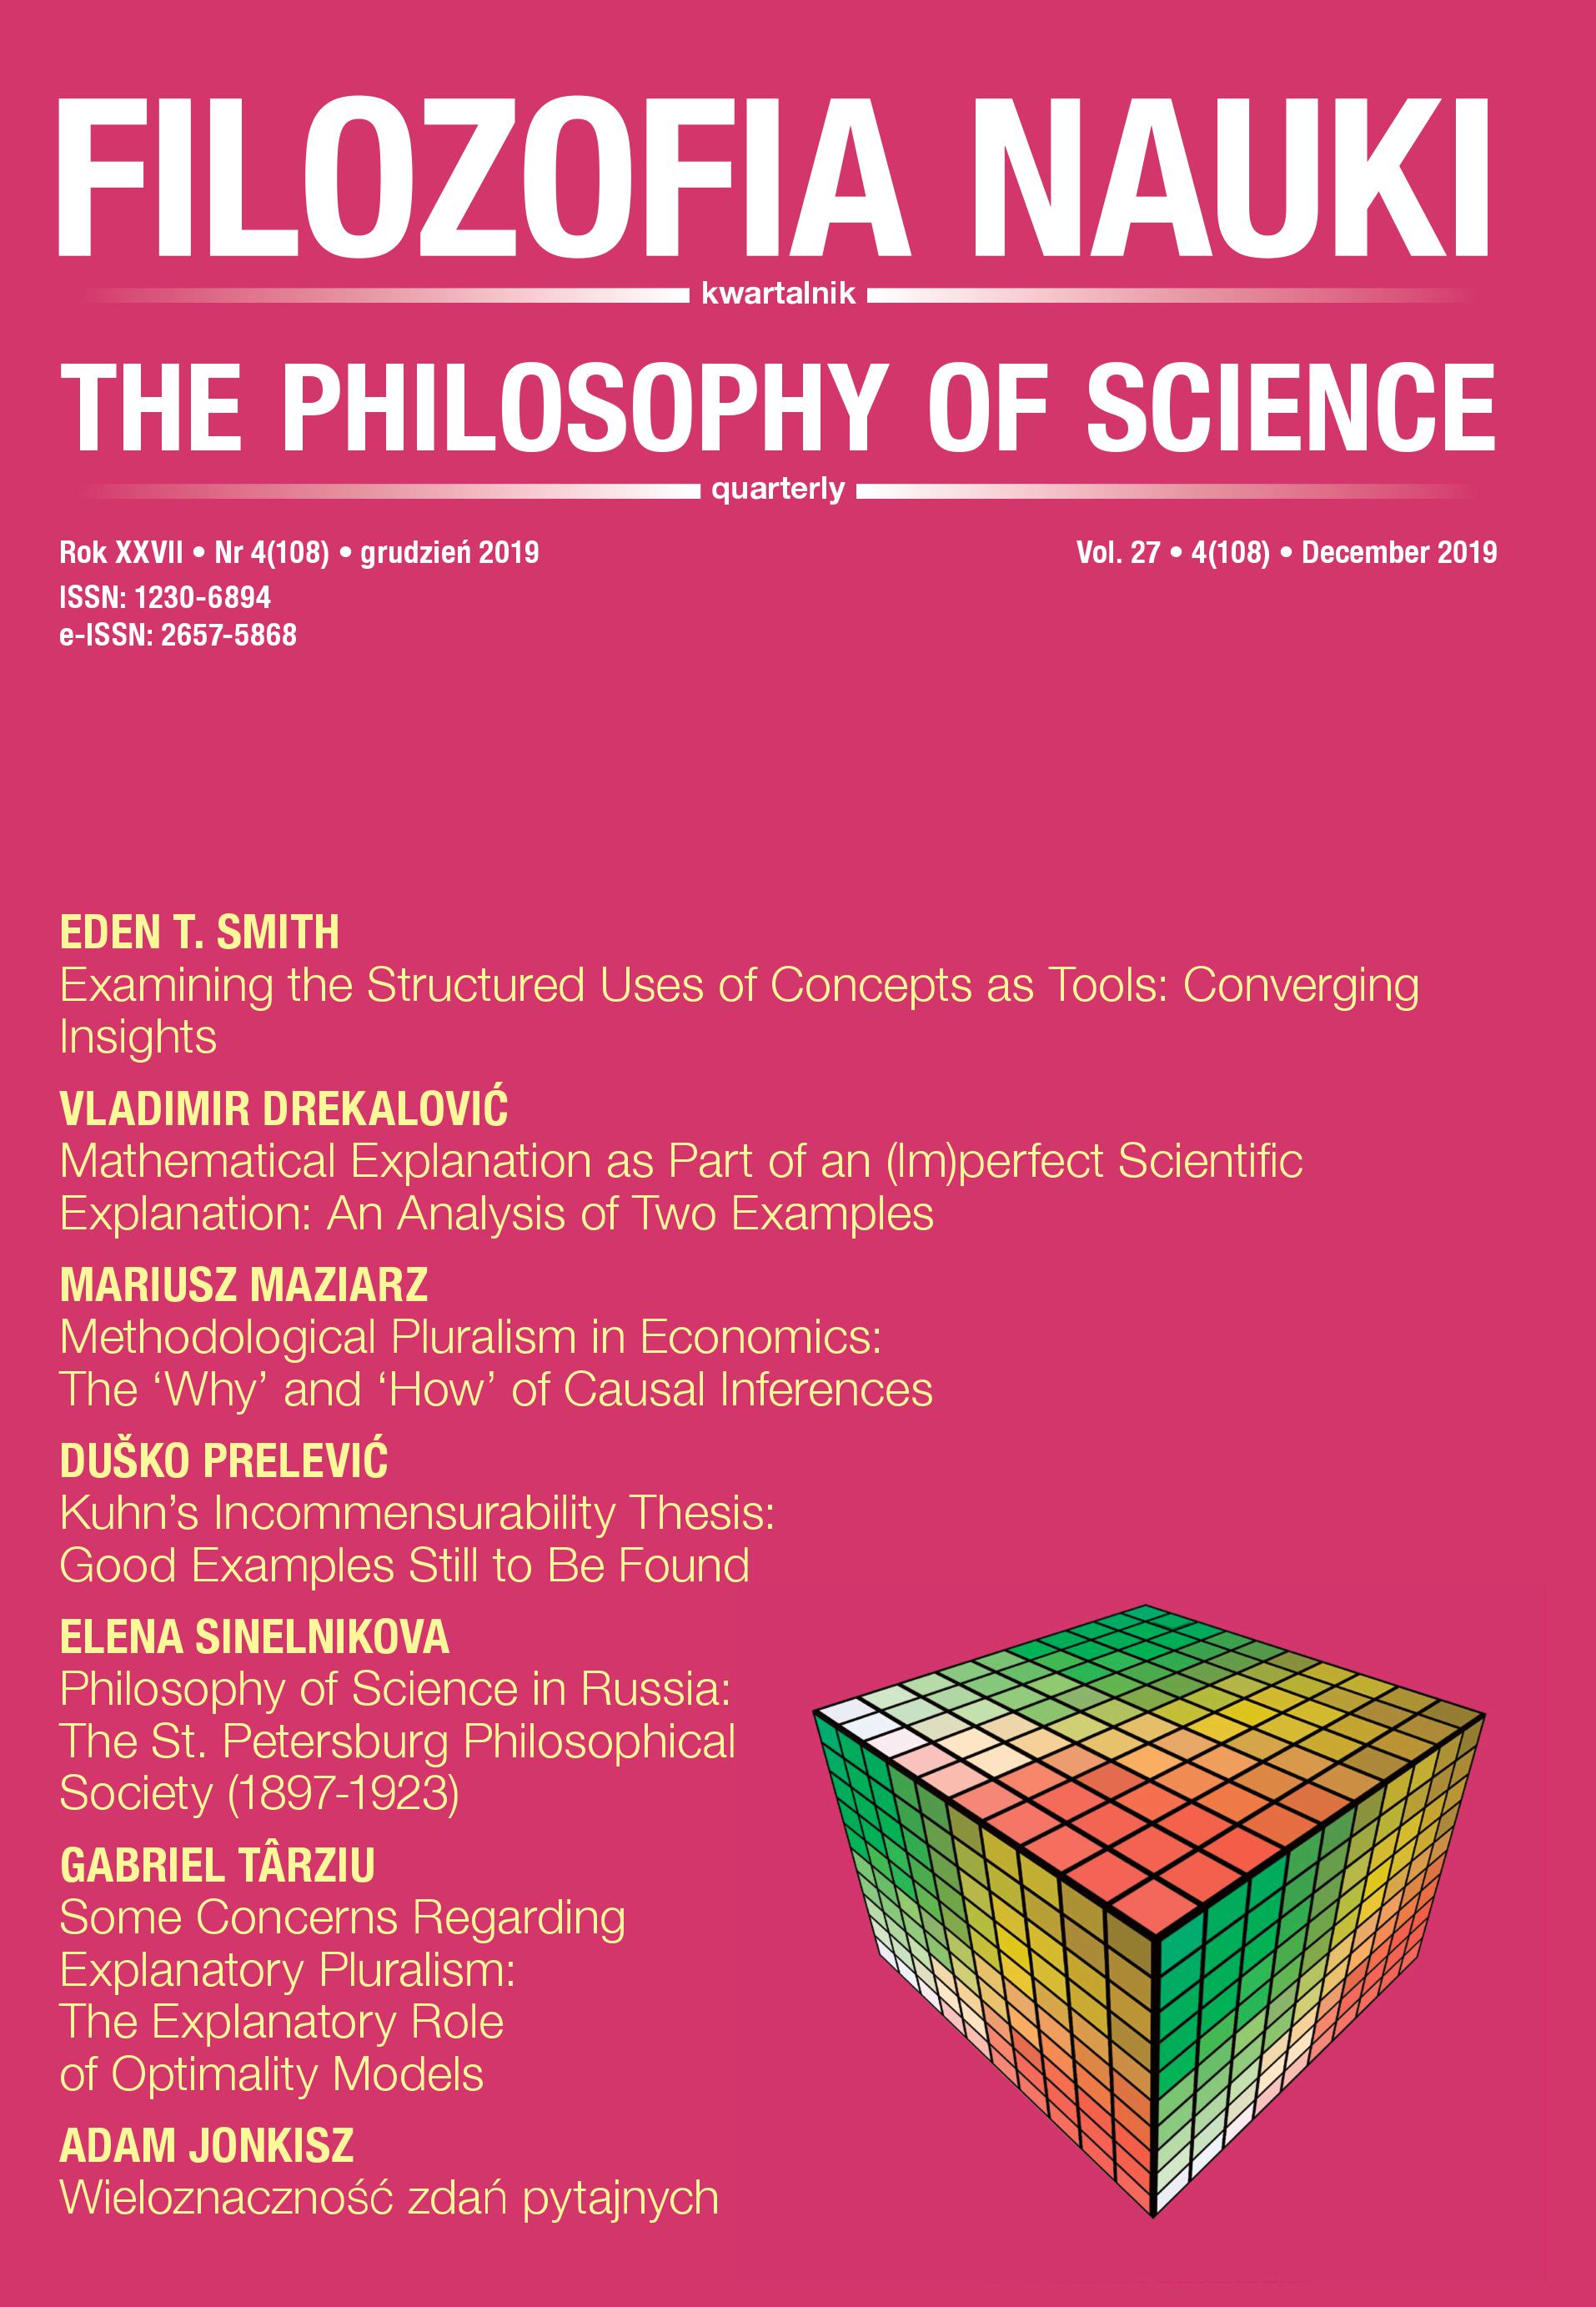 					View Vol. 27 No. 4 (2019): THE PHILOSOPHY OF SCIENCE
				